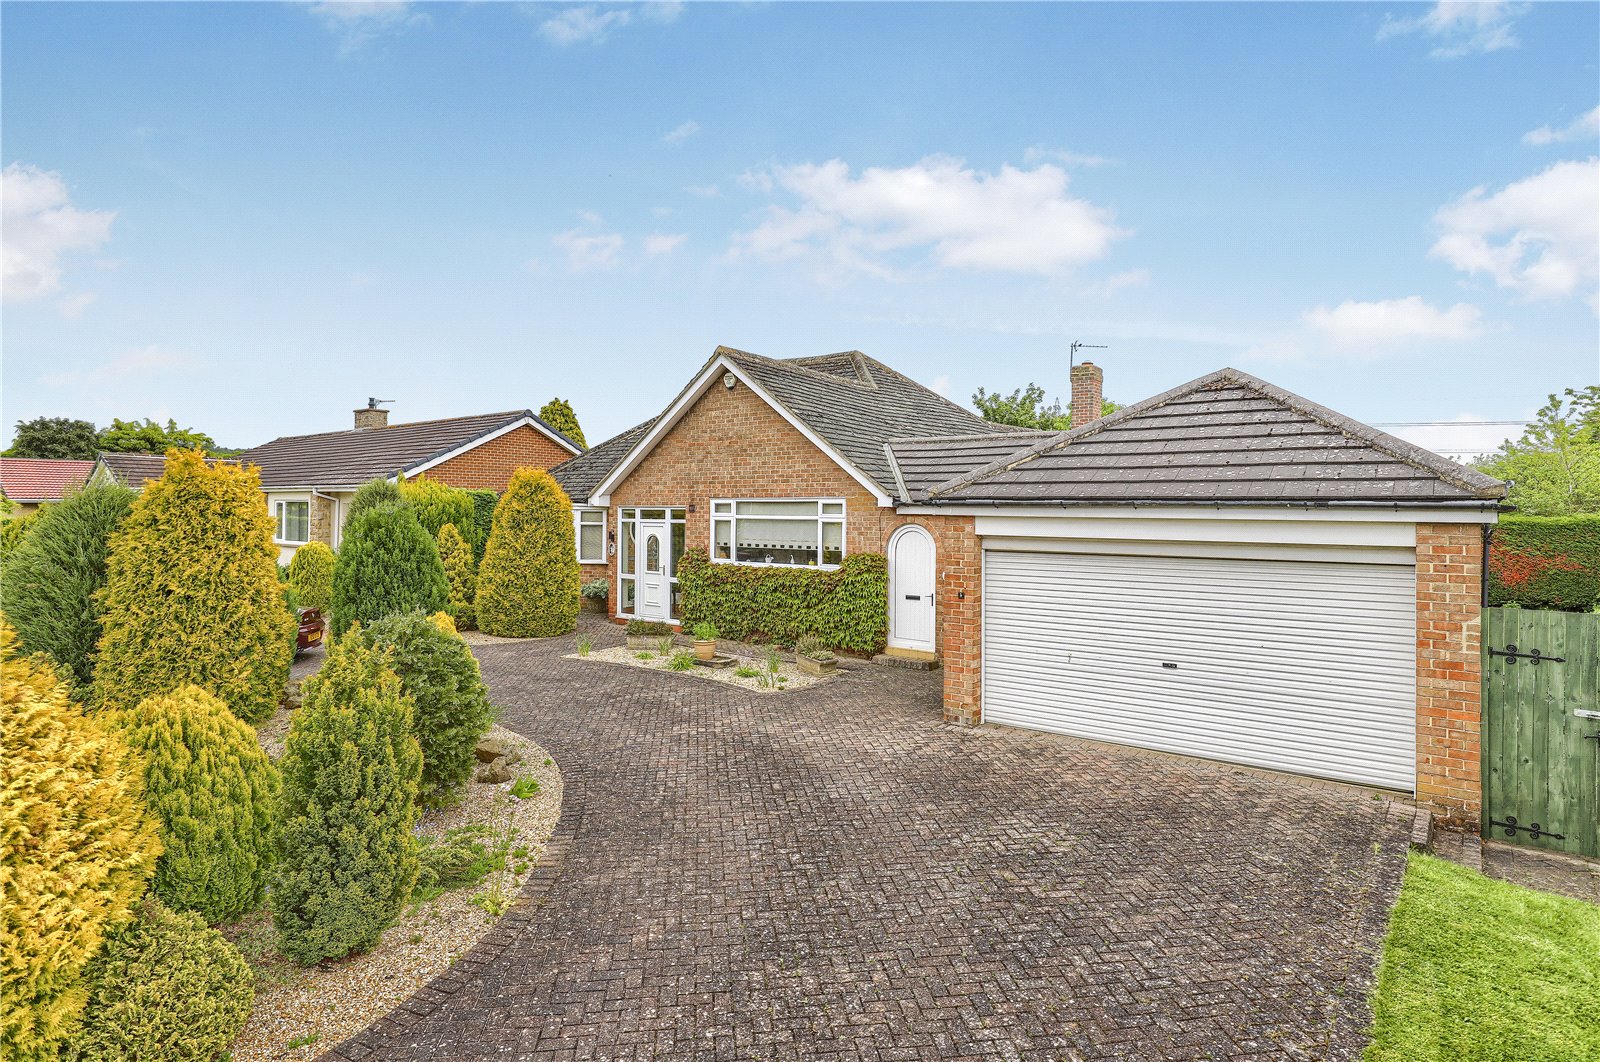 2 bed bungalow for sale in Cortland Road, Nunthorpe 1